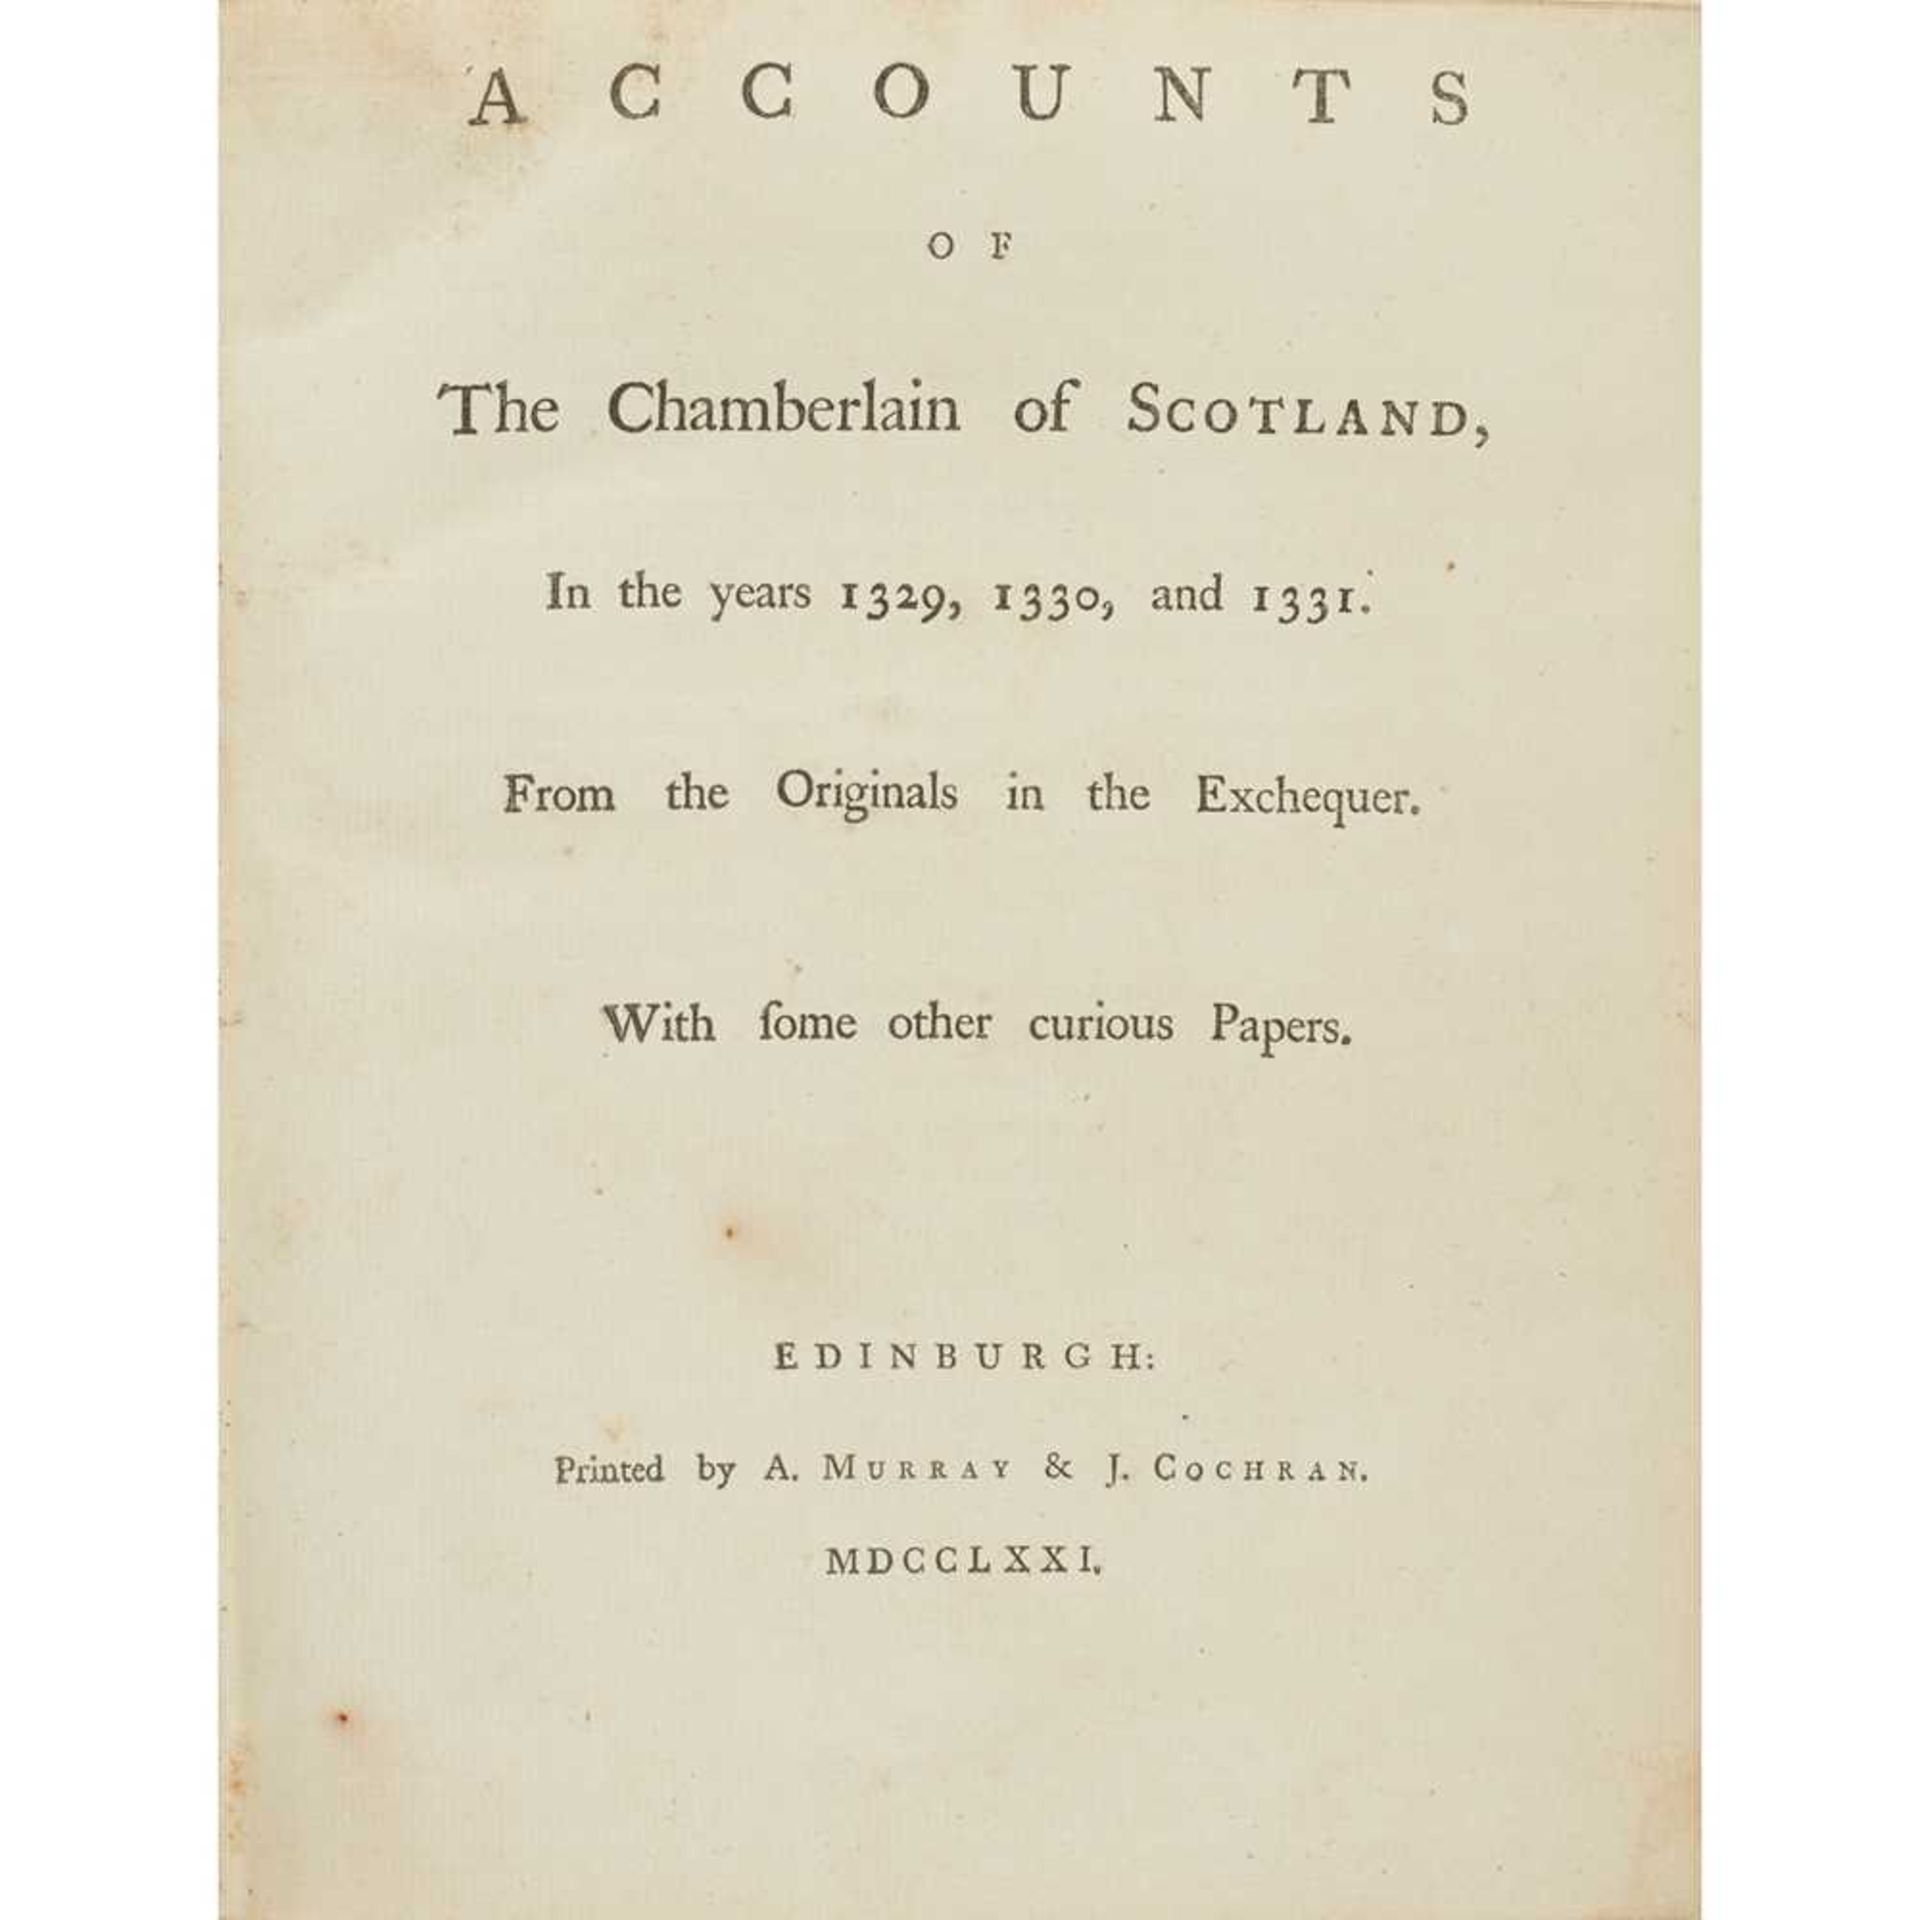 Collection of pamphlets, a bound quantity including the Accounts of the Chamberlain of Scotland